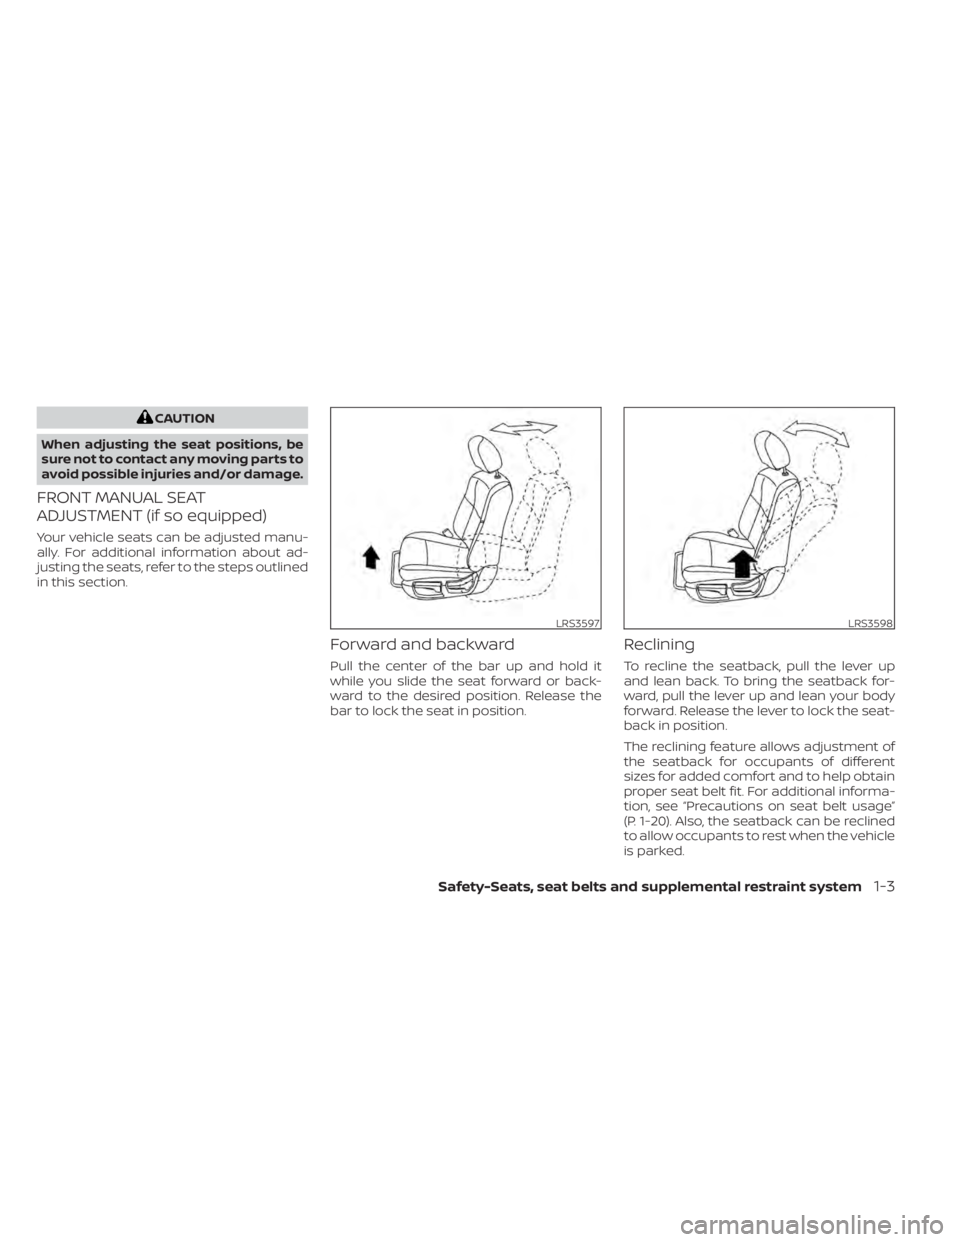 NISSAN PATHFINDER 2023 Owners Manual CAUTION
When adjusting the seat positions, be
sure not to contact any moving parts to
avoid possible injuries and/or damage.
FRONT MANUAL SEAT
ADJUSTMENT (if so equipped)
Your vehicle seats can be adj